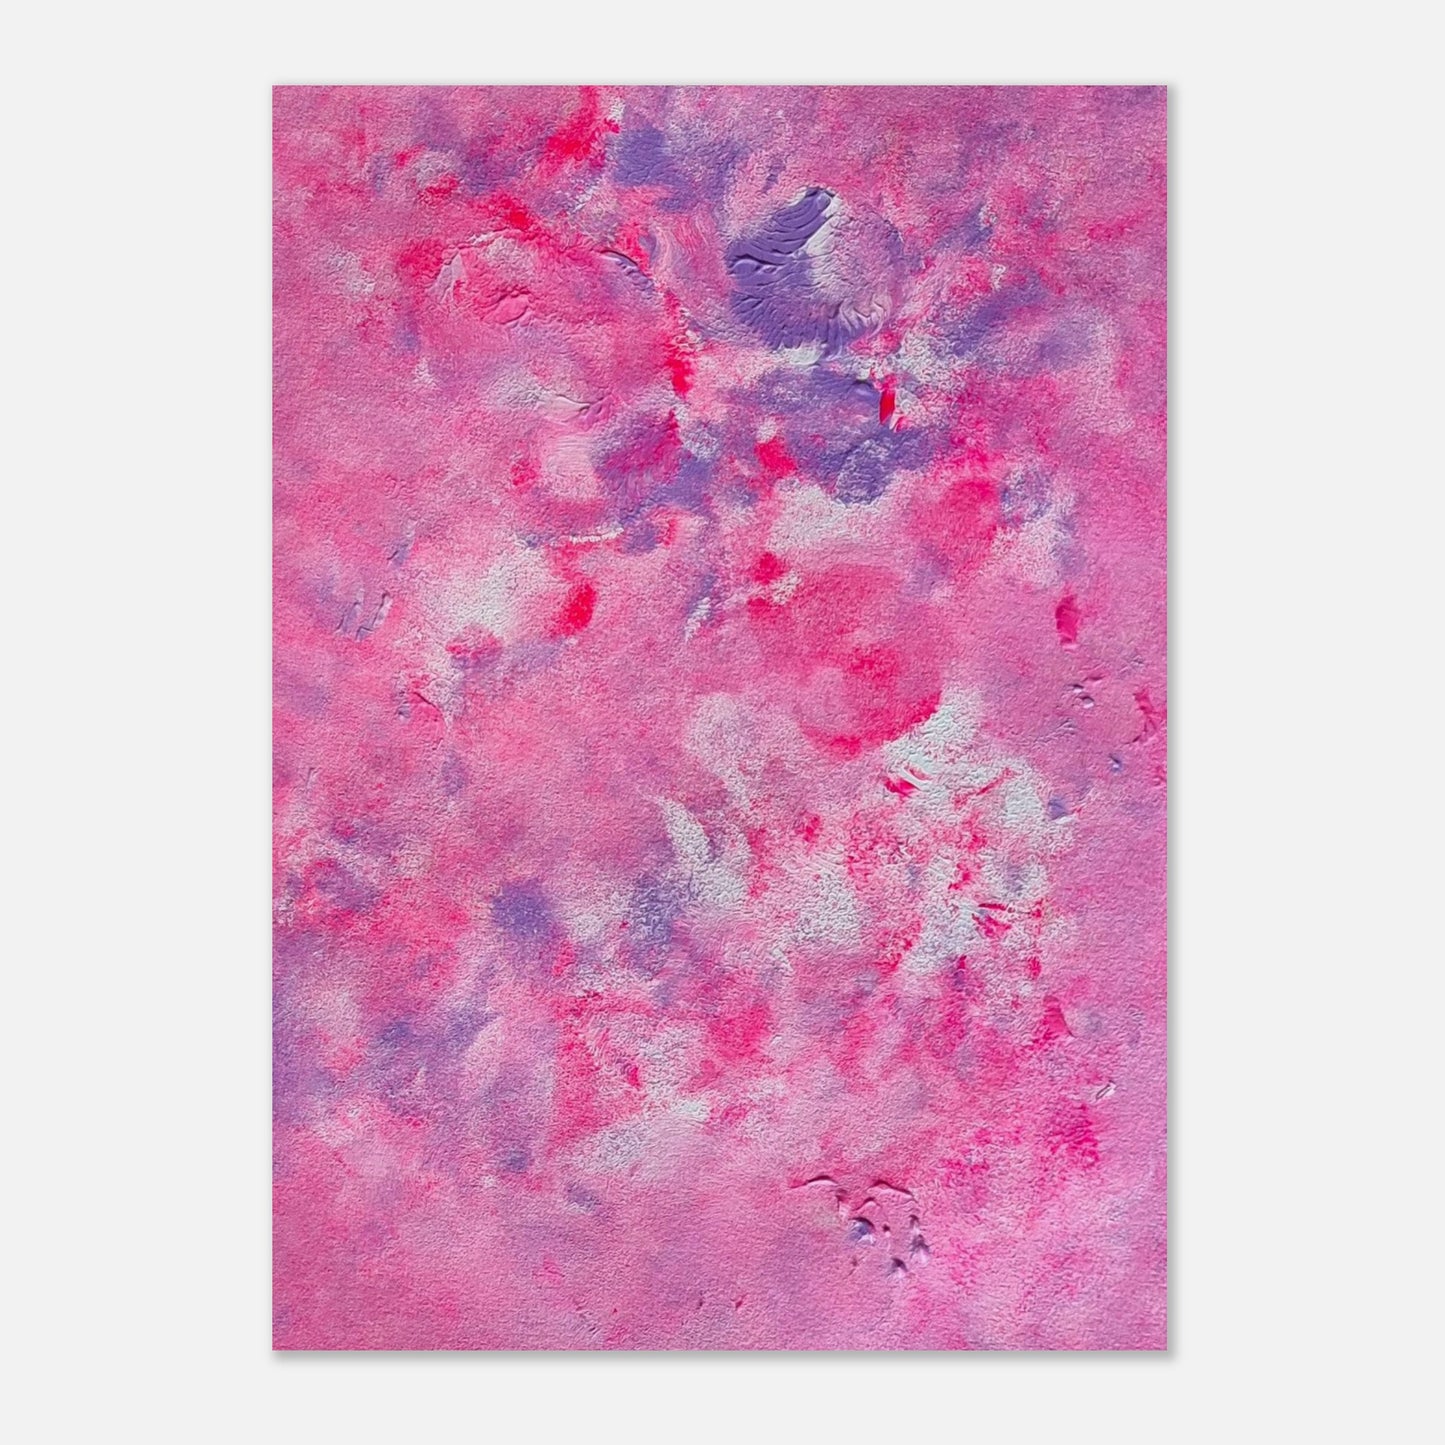 Pink, purple and white abstract art poster hanging vertically on a white background